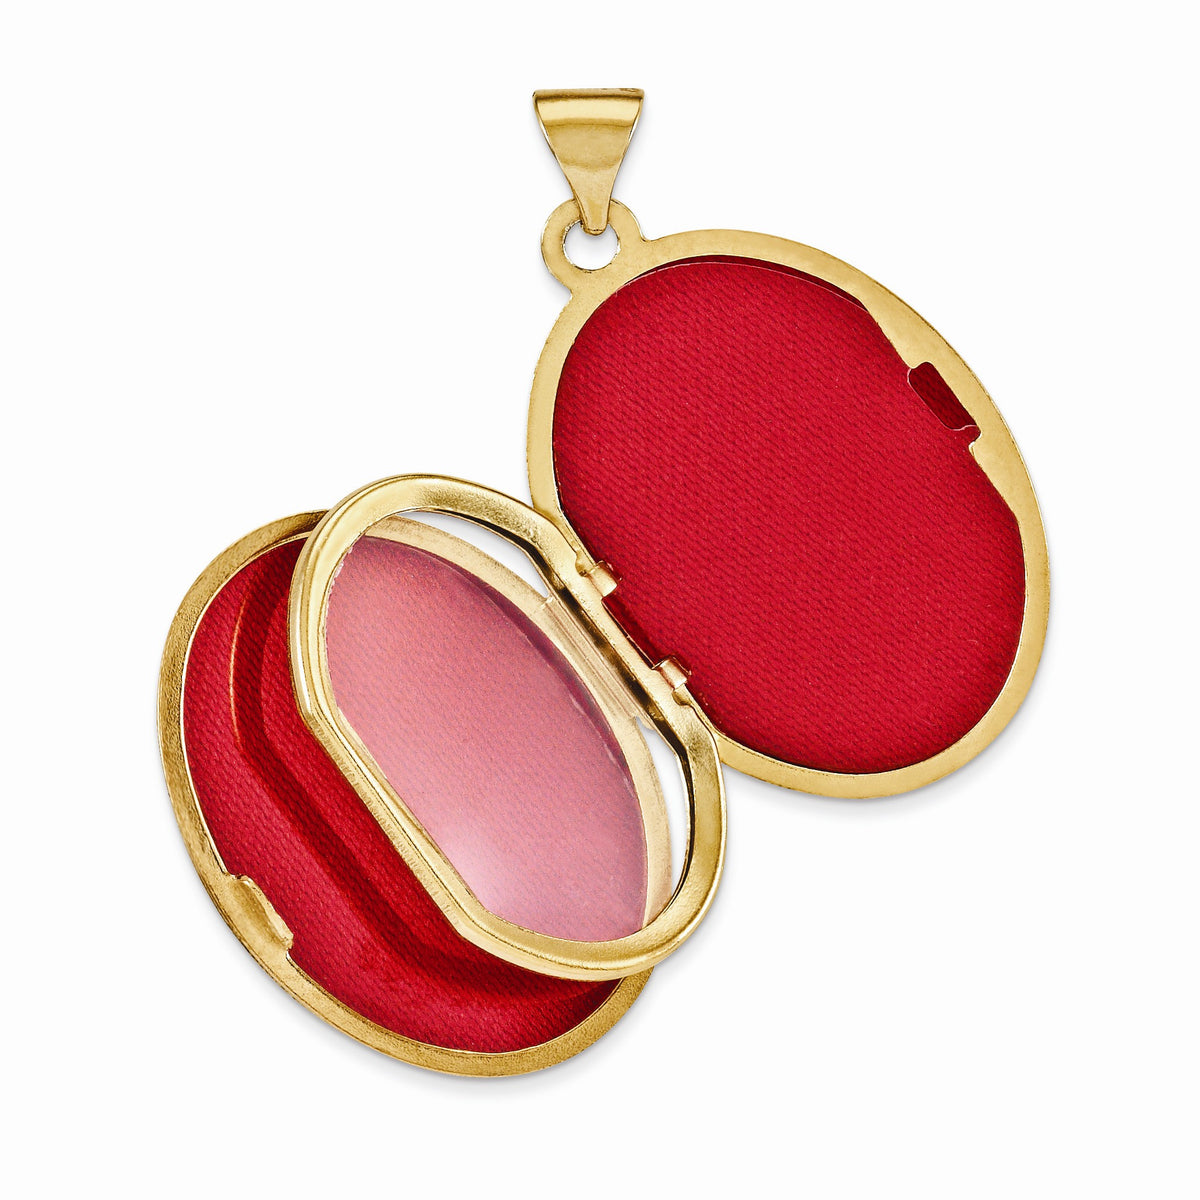 Alternate view of the 14k Yellow Gold 21mm Scroll and Hearts Border Oval Locket by The Black Bow Jewelry Co.